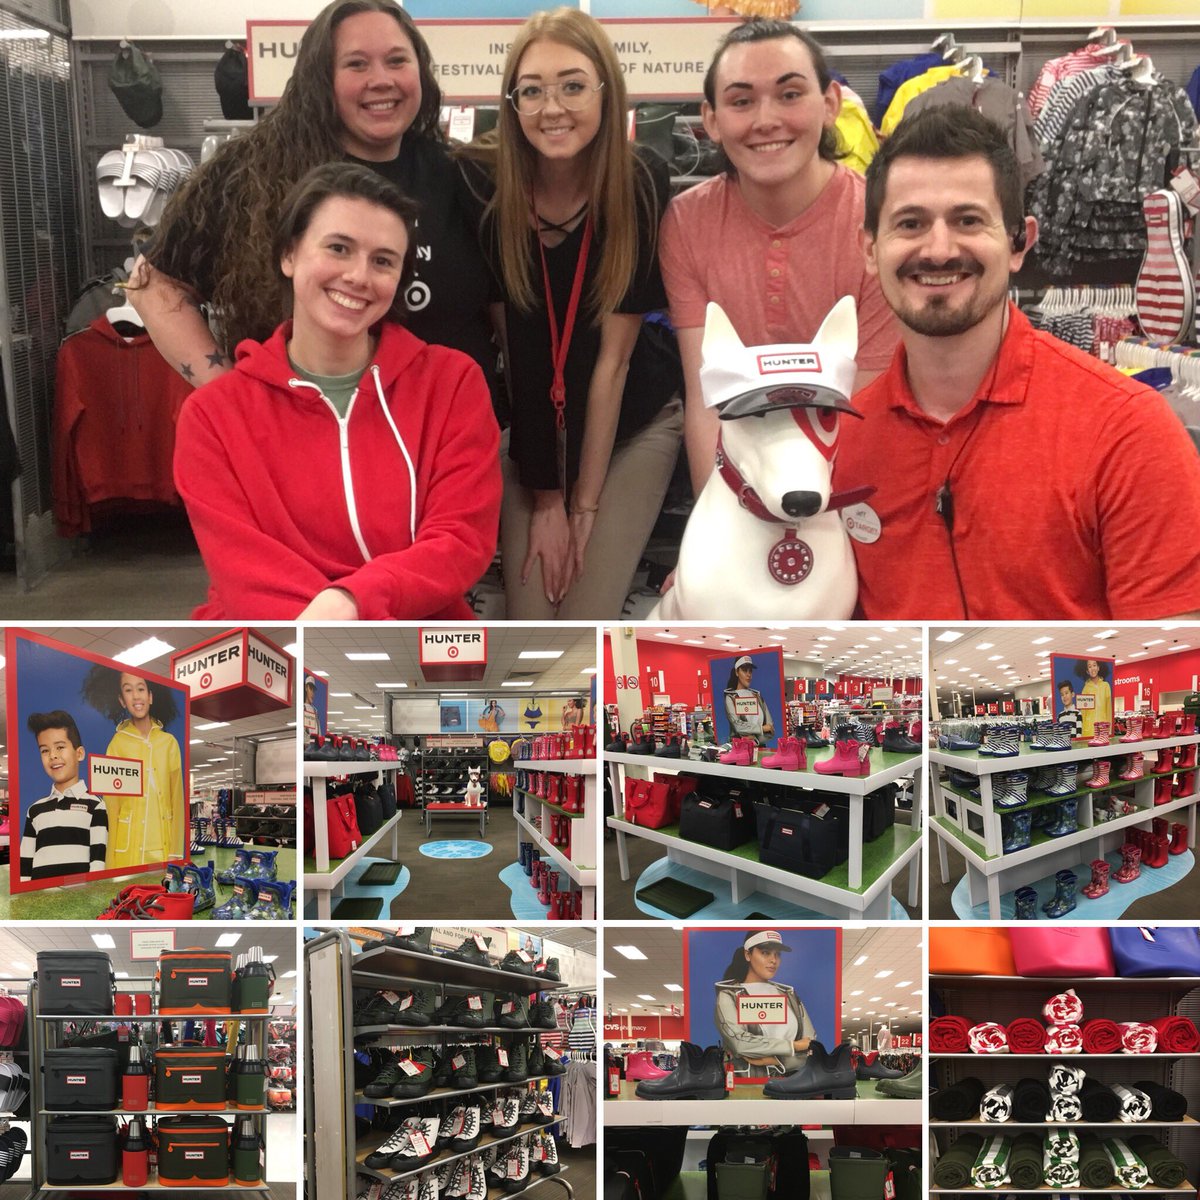 Come check out our newest brand HUNTER at the Edmond Super Target! Supplies are limited! #hunterxtarget @Lawwible @jongoodin